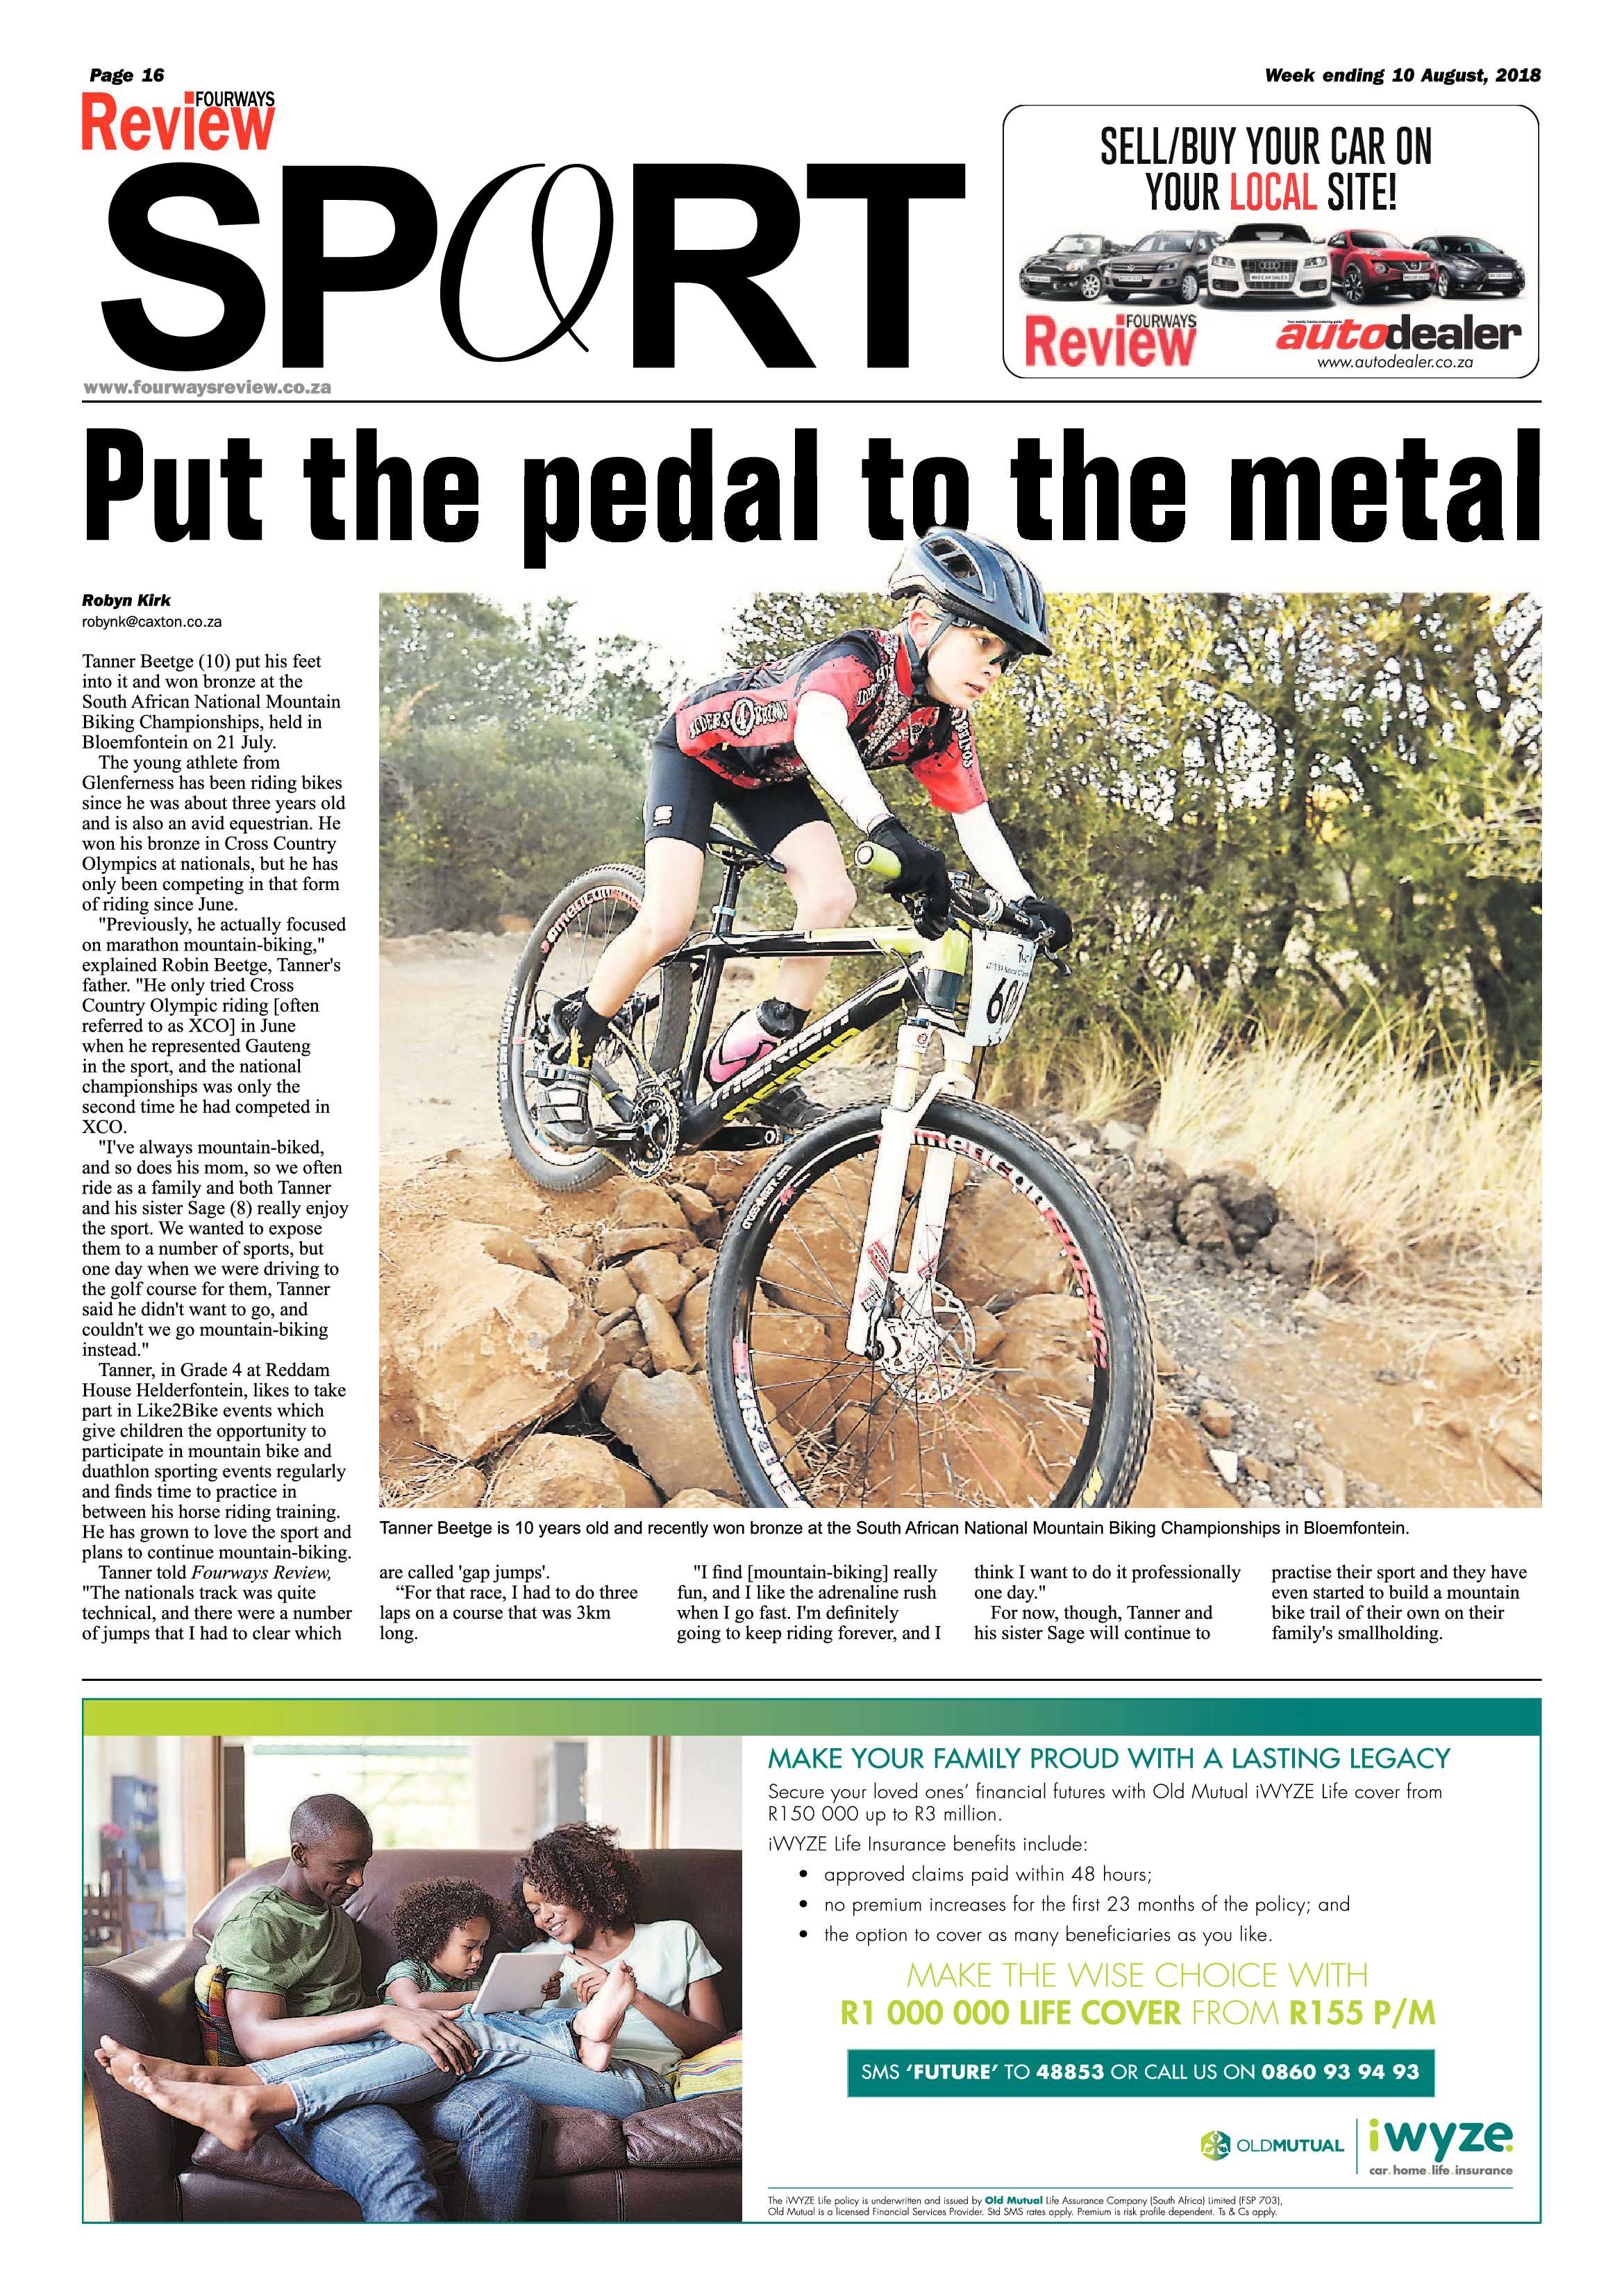 Fourways Review 10 August, 2018 page 16